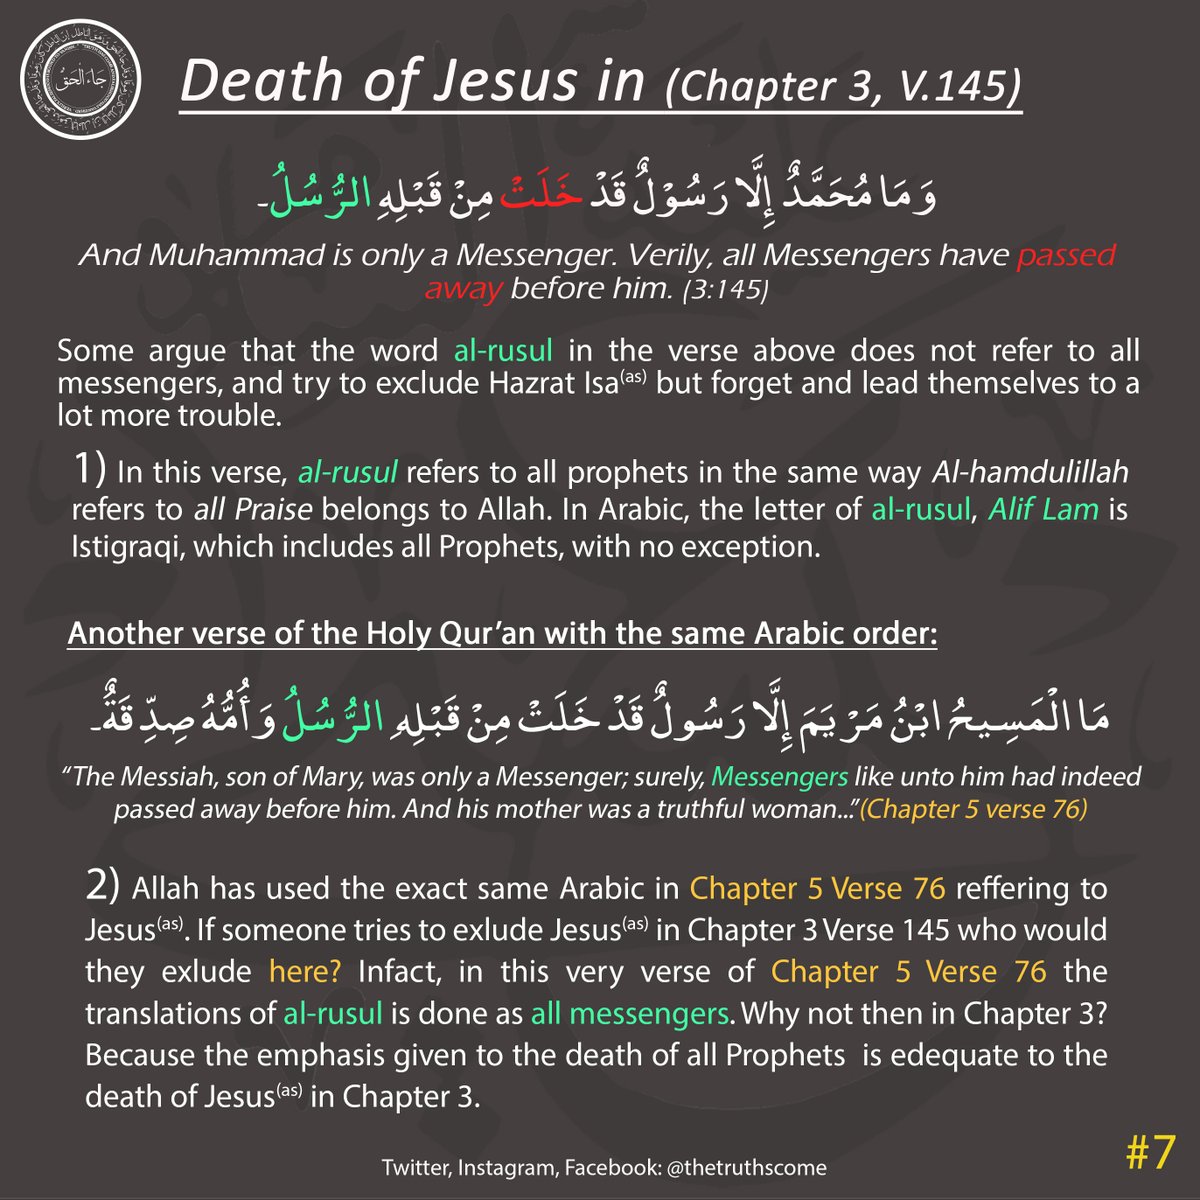 Another excuse by non-Ahmadi Muslims is, that they try to exclude Jesus(as) from this verse by saying, that Al-Rusul doesn't mean all Prophets. However "Al-Rusul" includes all Prophets without exception. In fact, Allah has used the same Arabic in Ch.5 v.76 referring to Jesus(as).